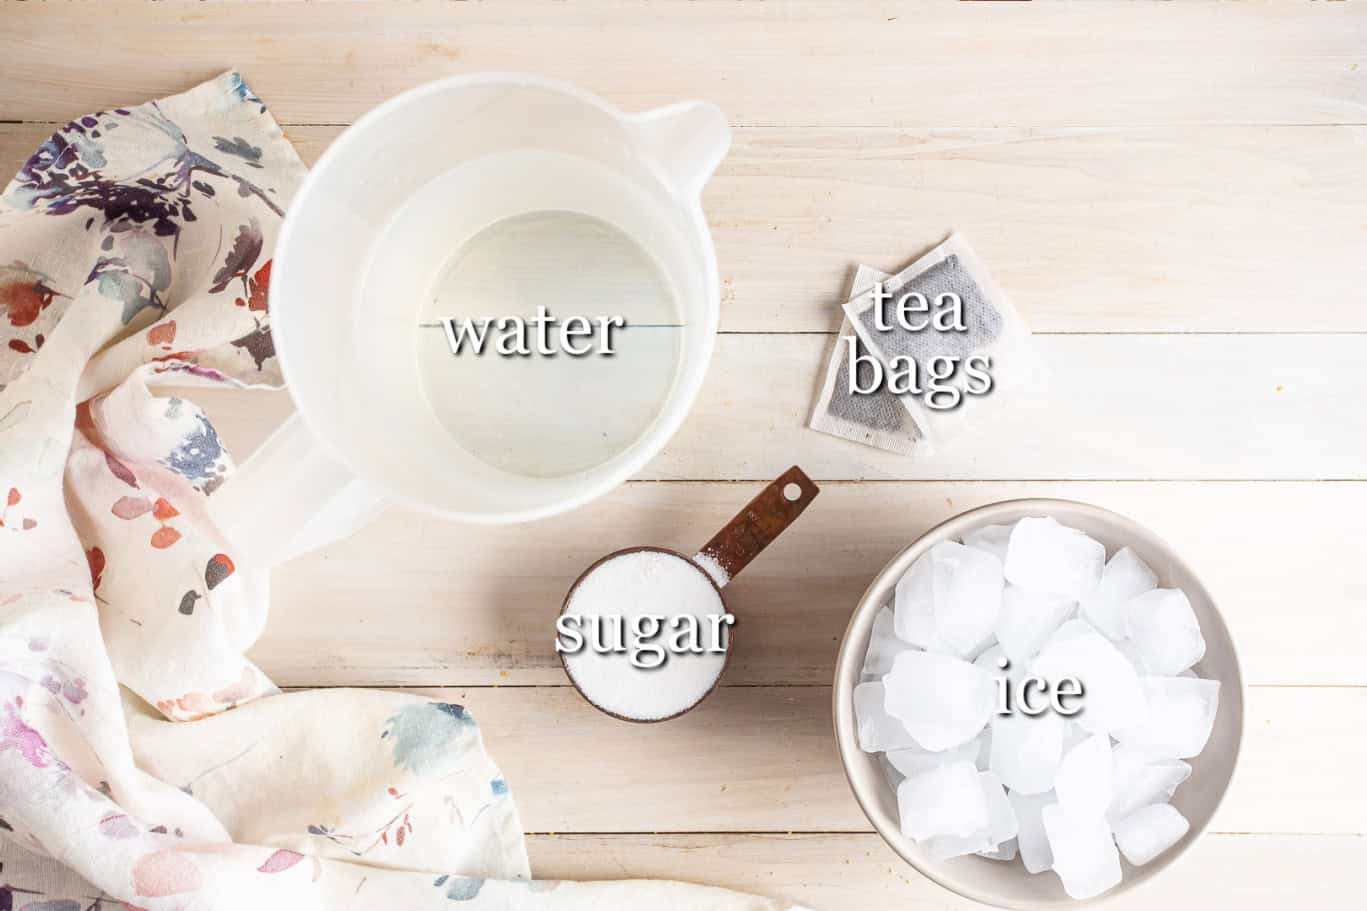 Ingredients for making iced tea, with text labels.